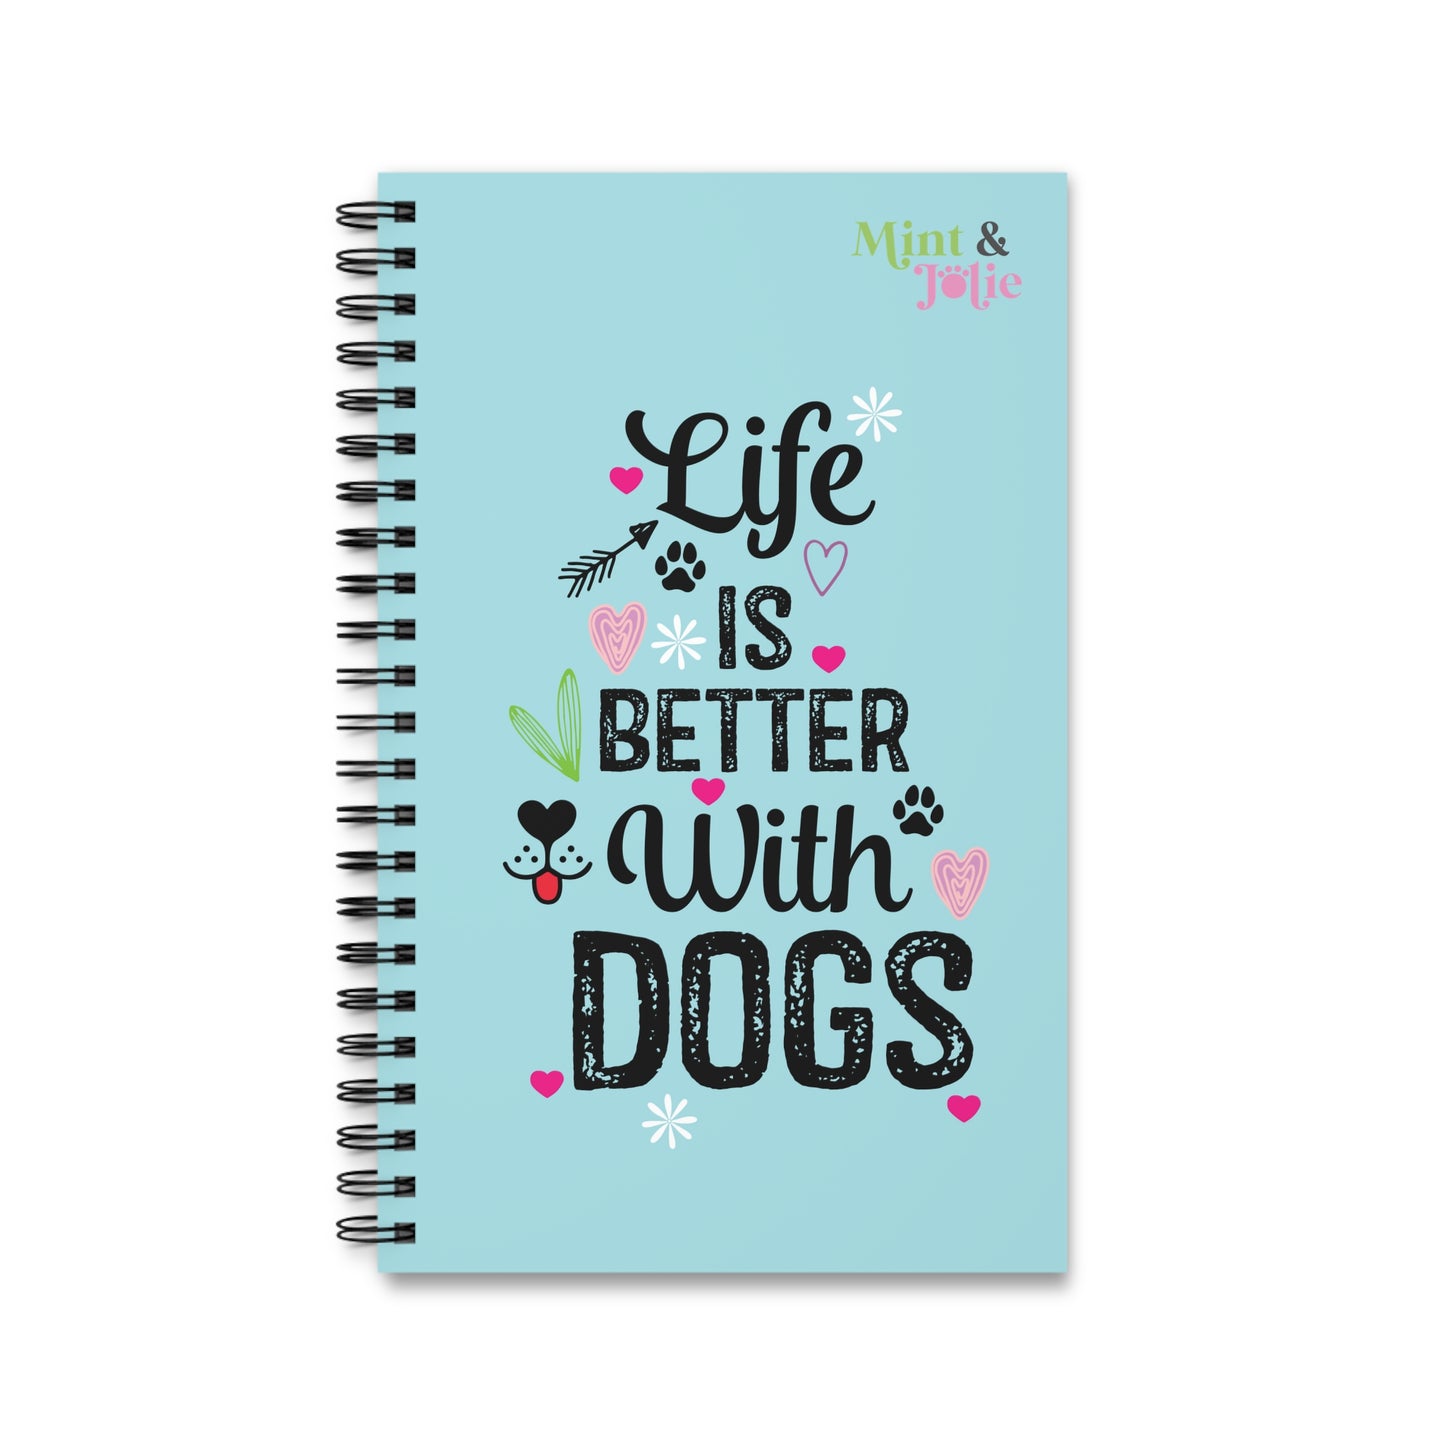 Life is better with dogs Spiral Journal